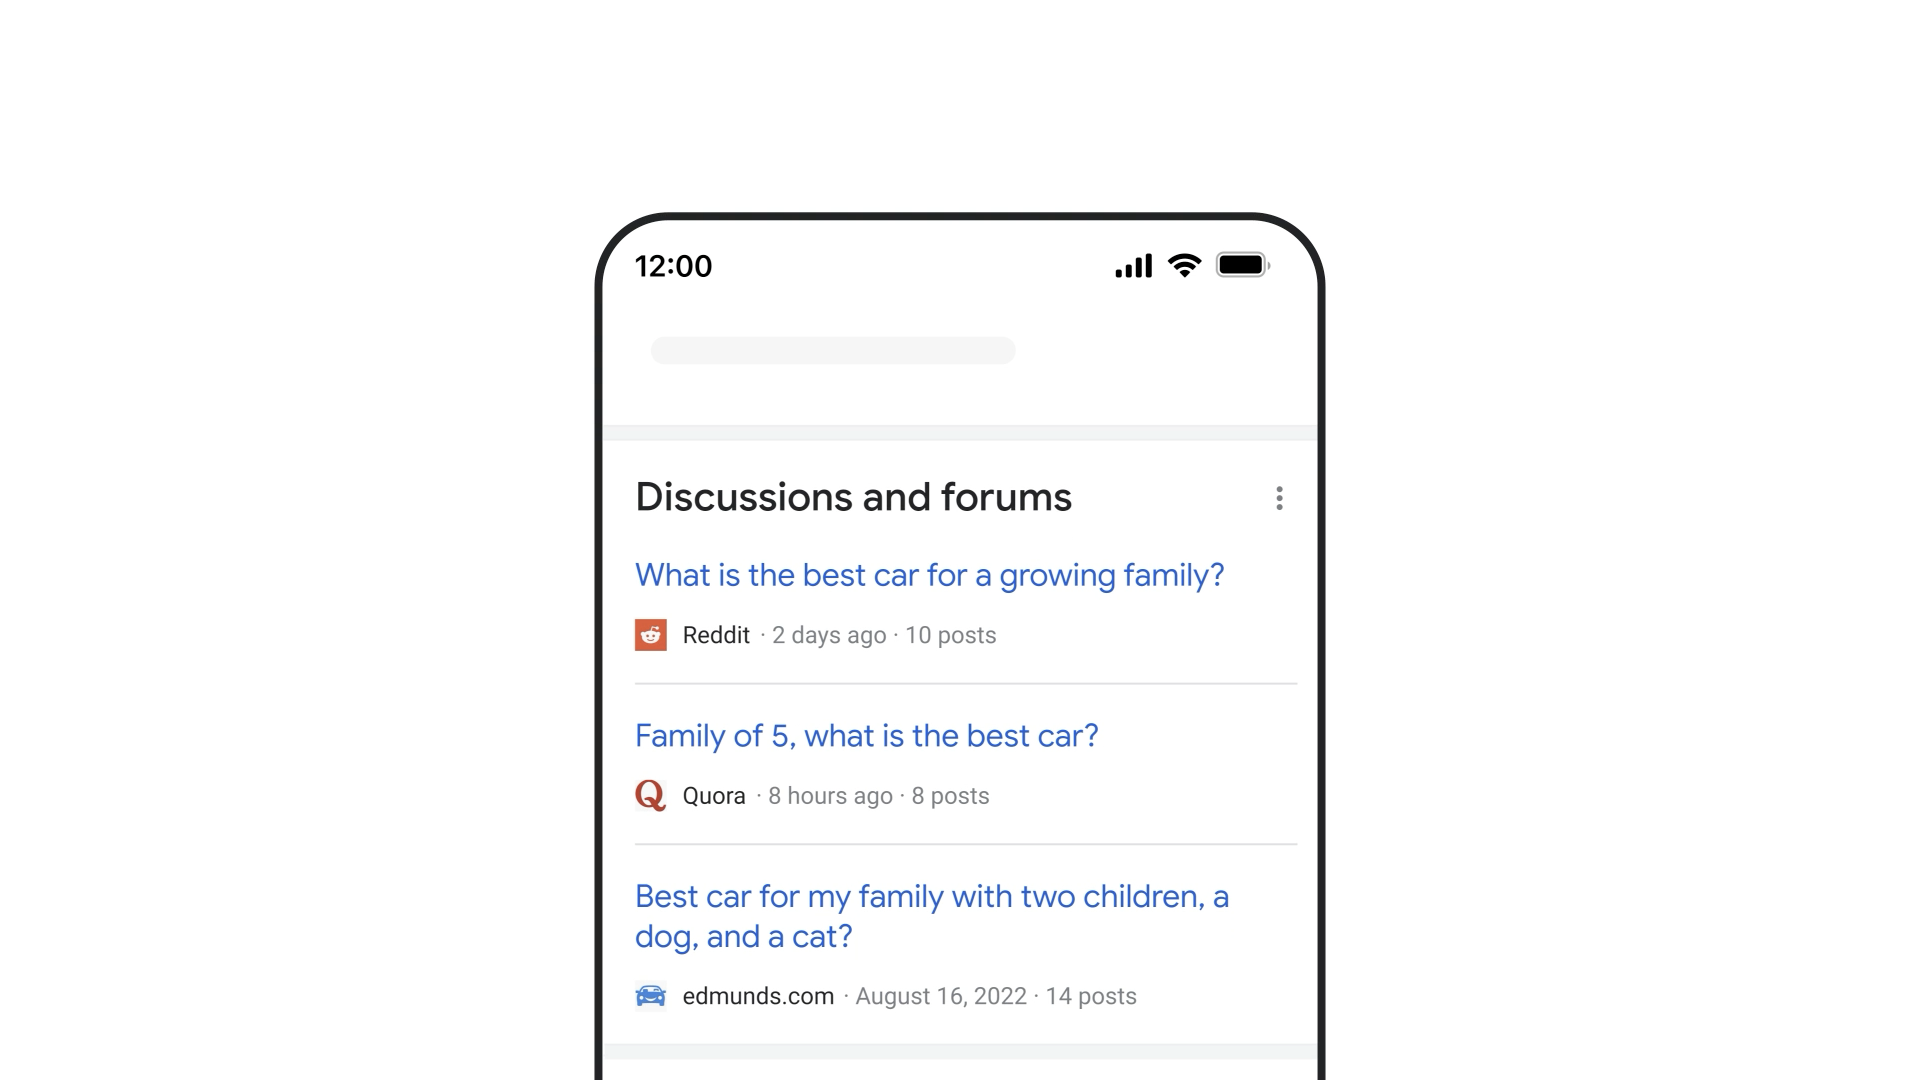 Neues Google feature: Discussions and forums